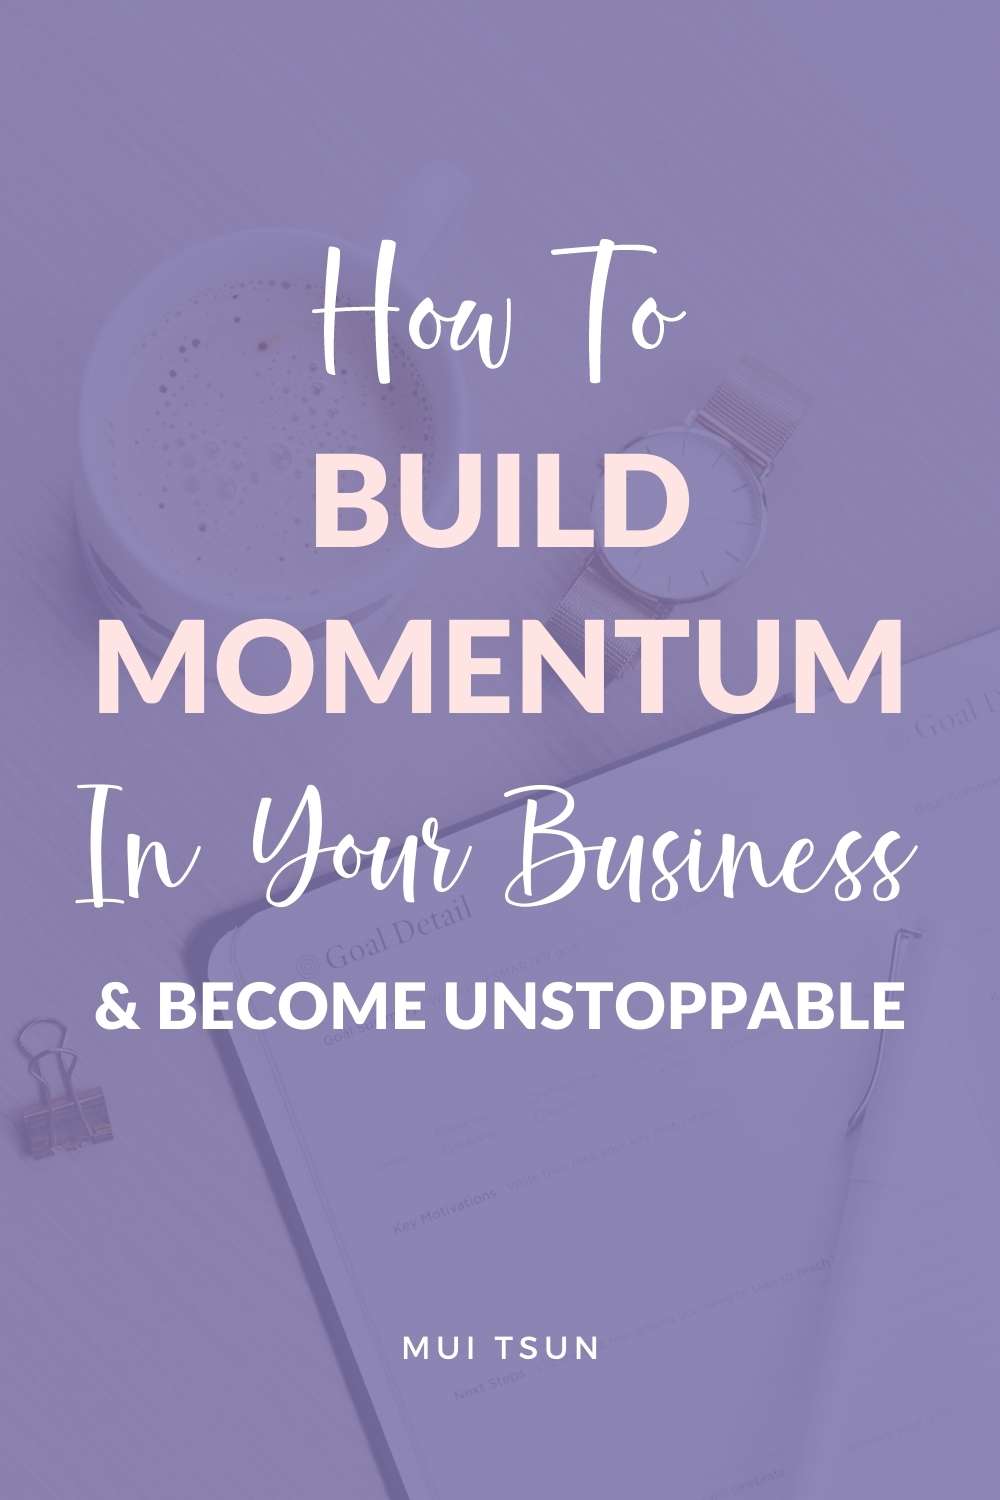 How to build momentum in your business and become unstoppable